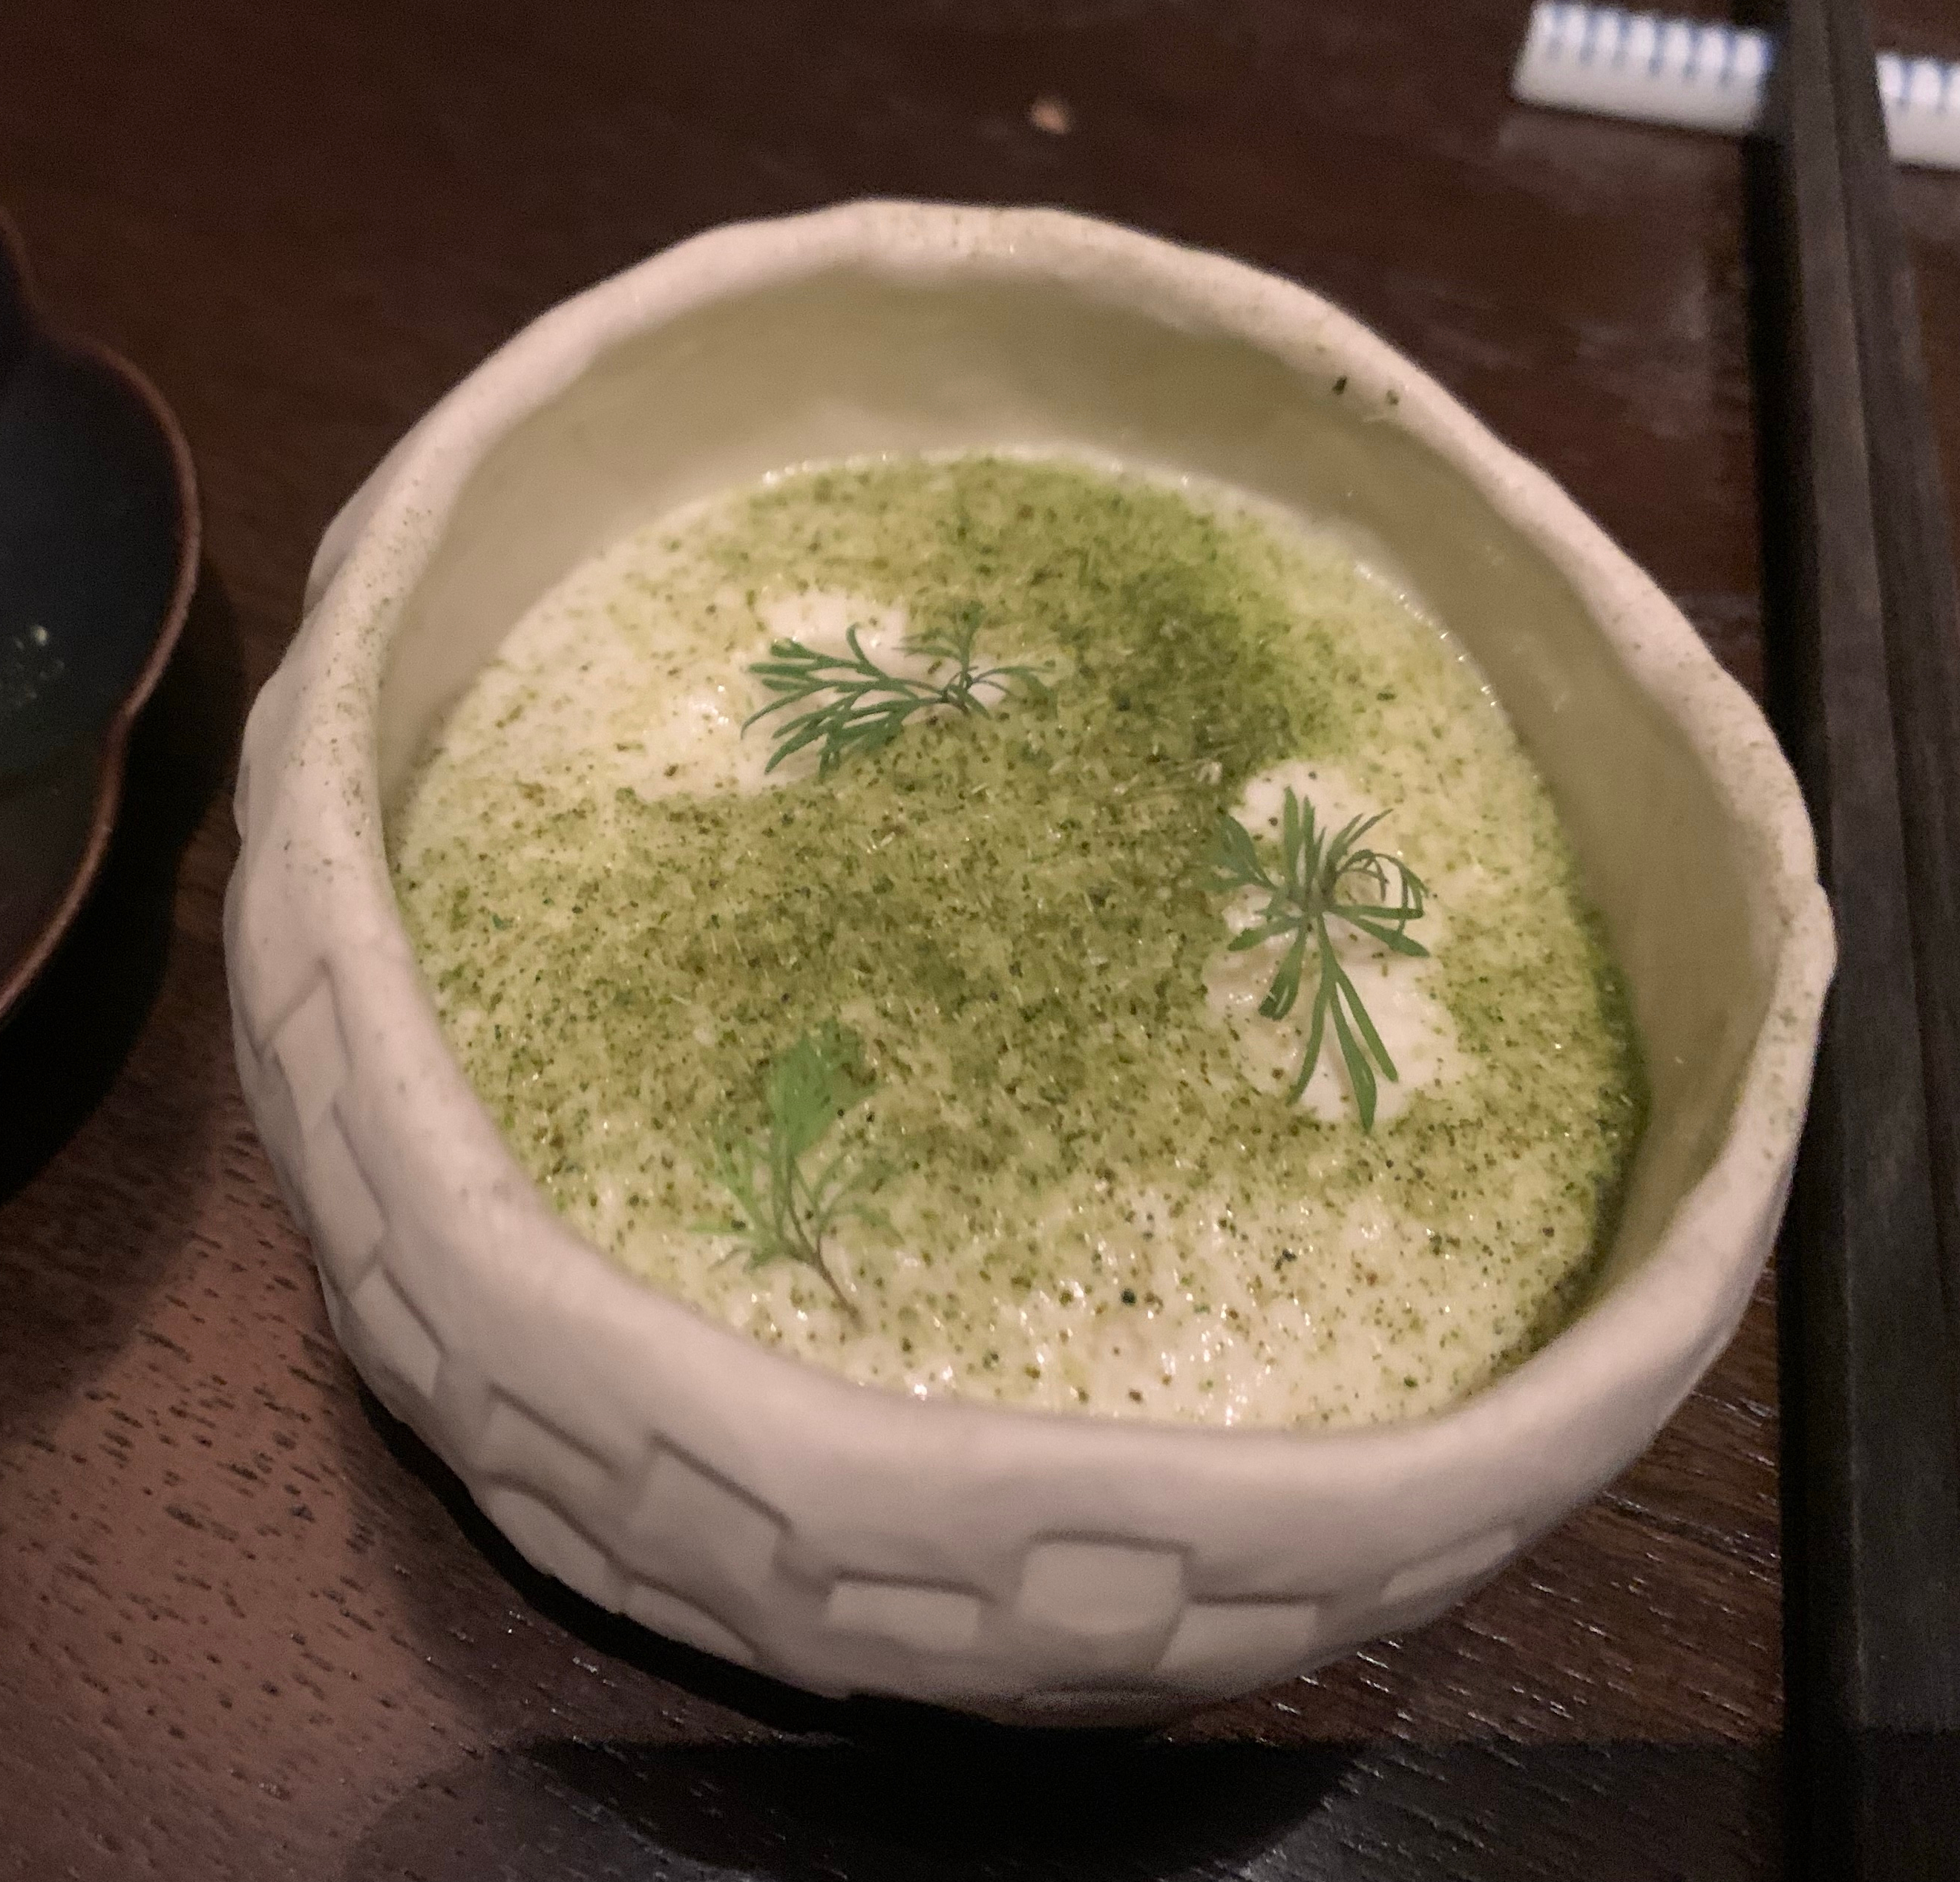 A bowl of foam, with green powder on top. No lobster is visible.